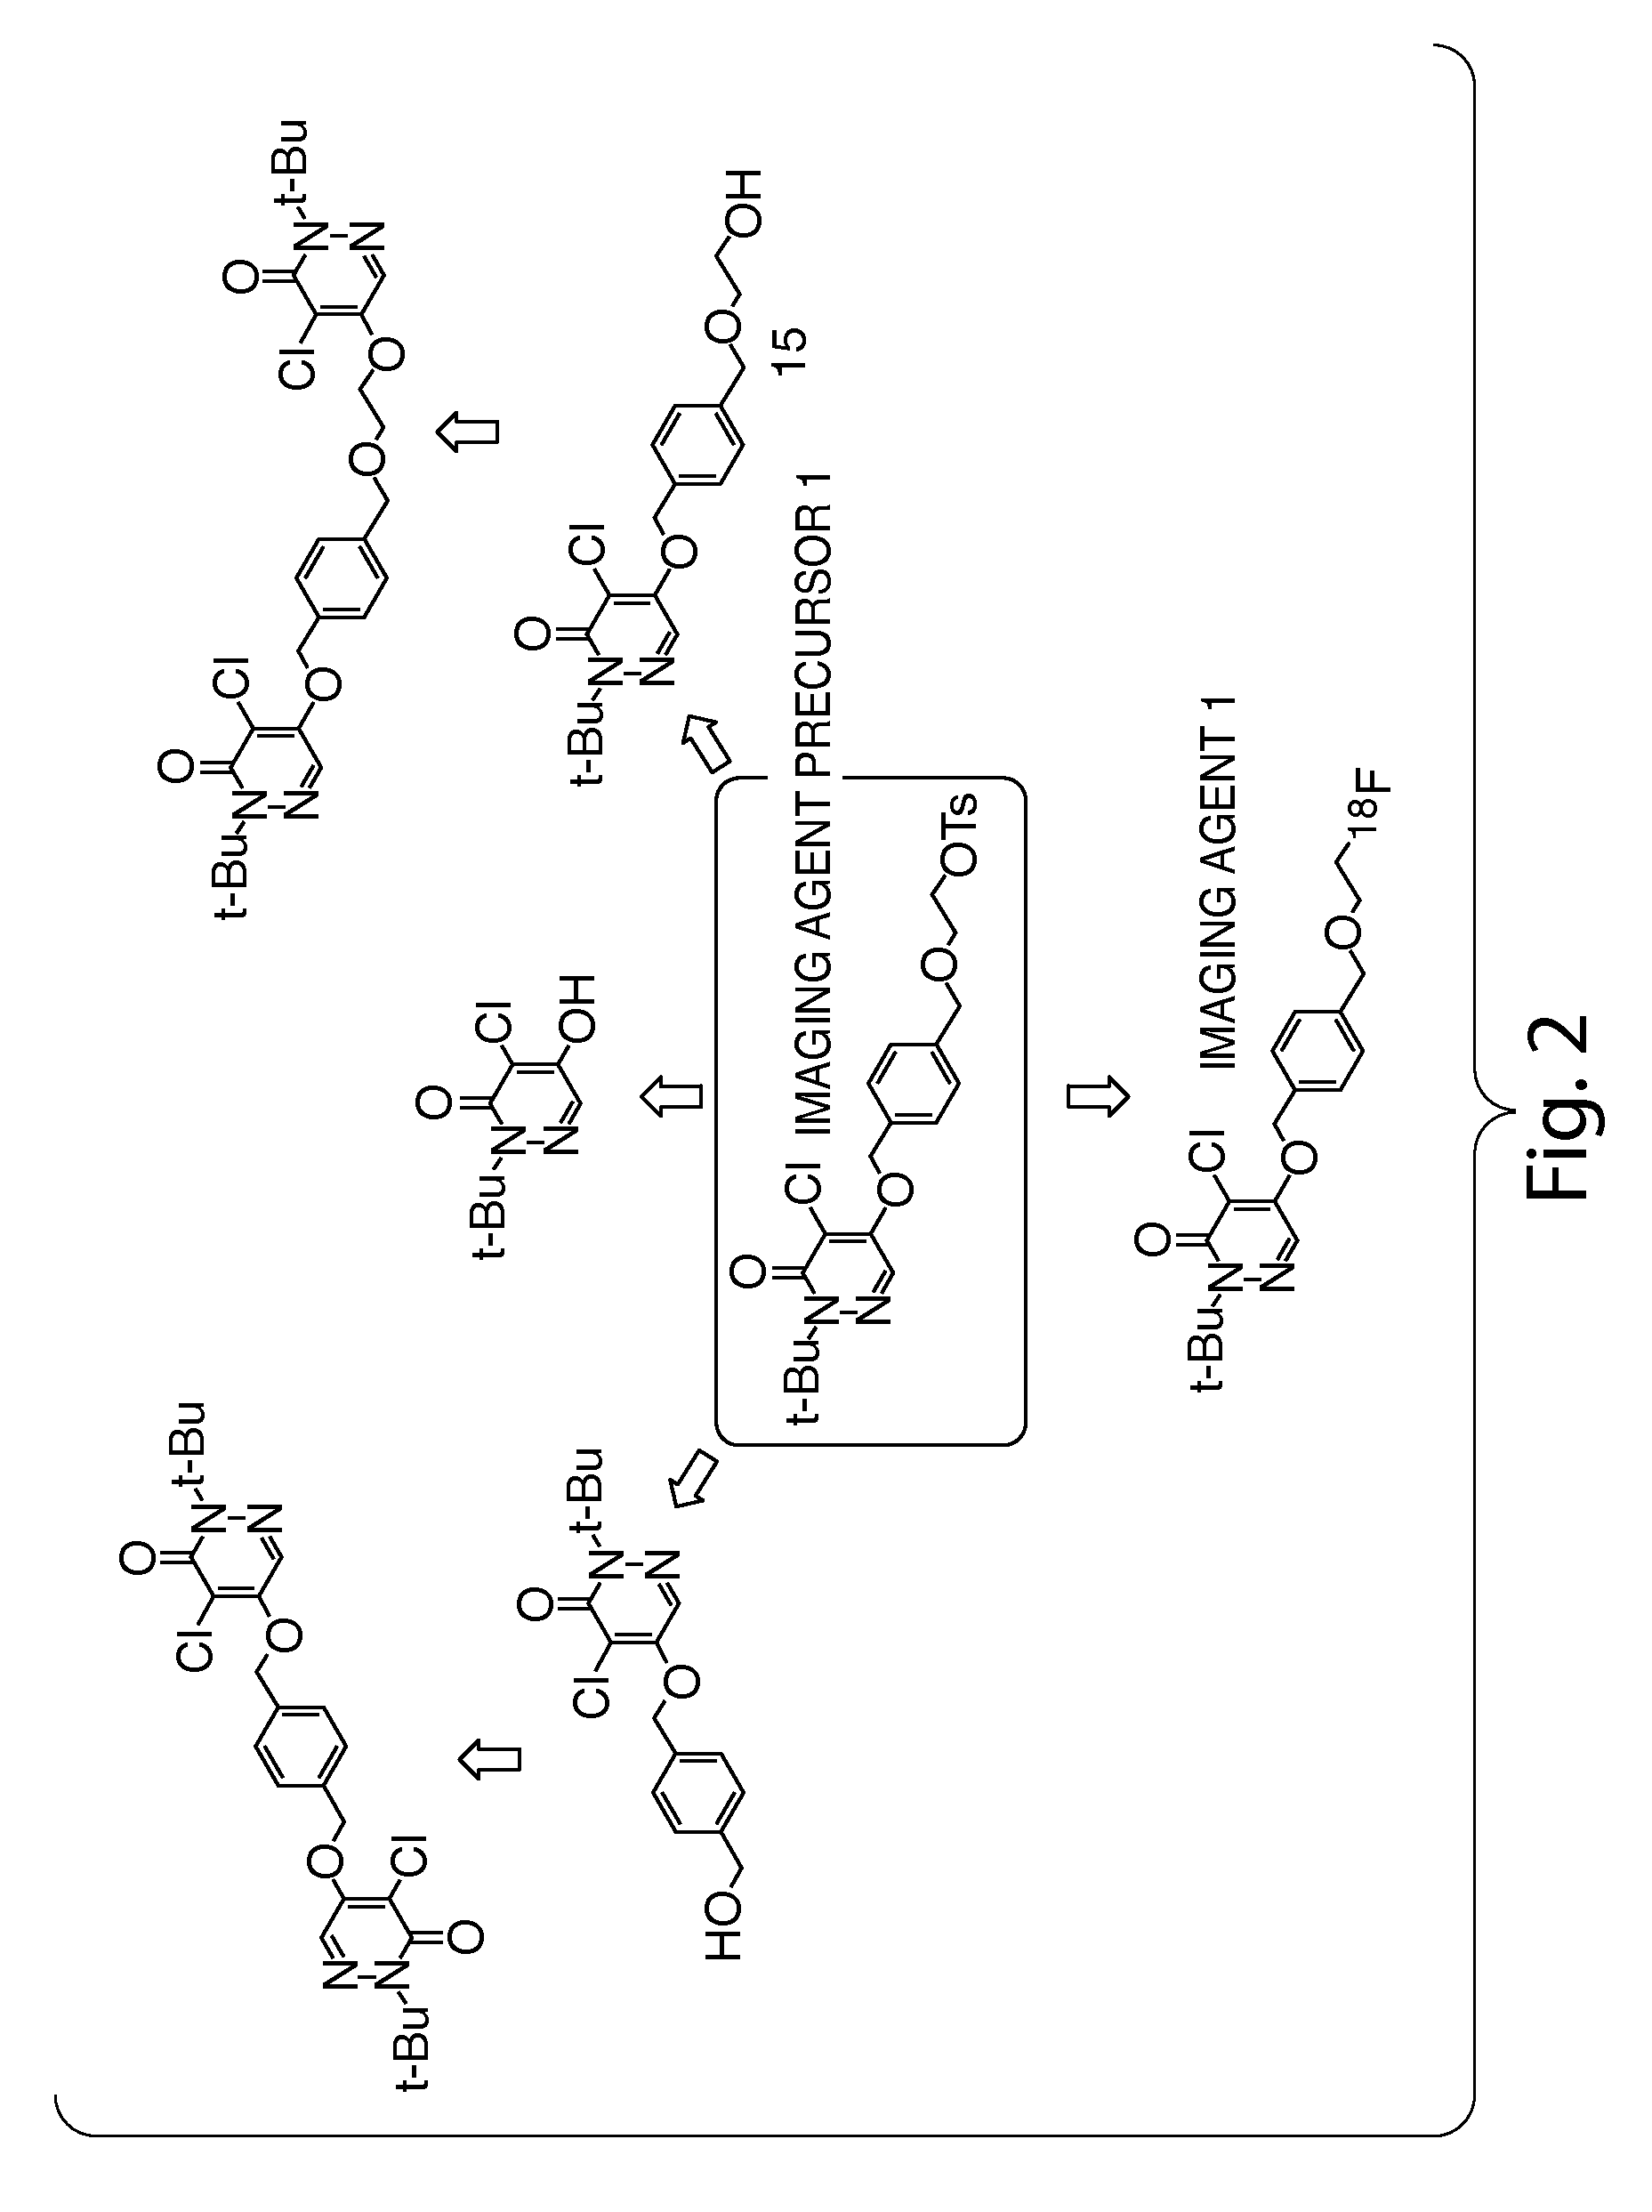 Methods and apparatus for synthesizing imaging agents, and intermediates thereof